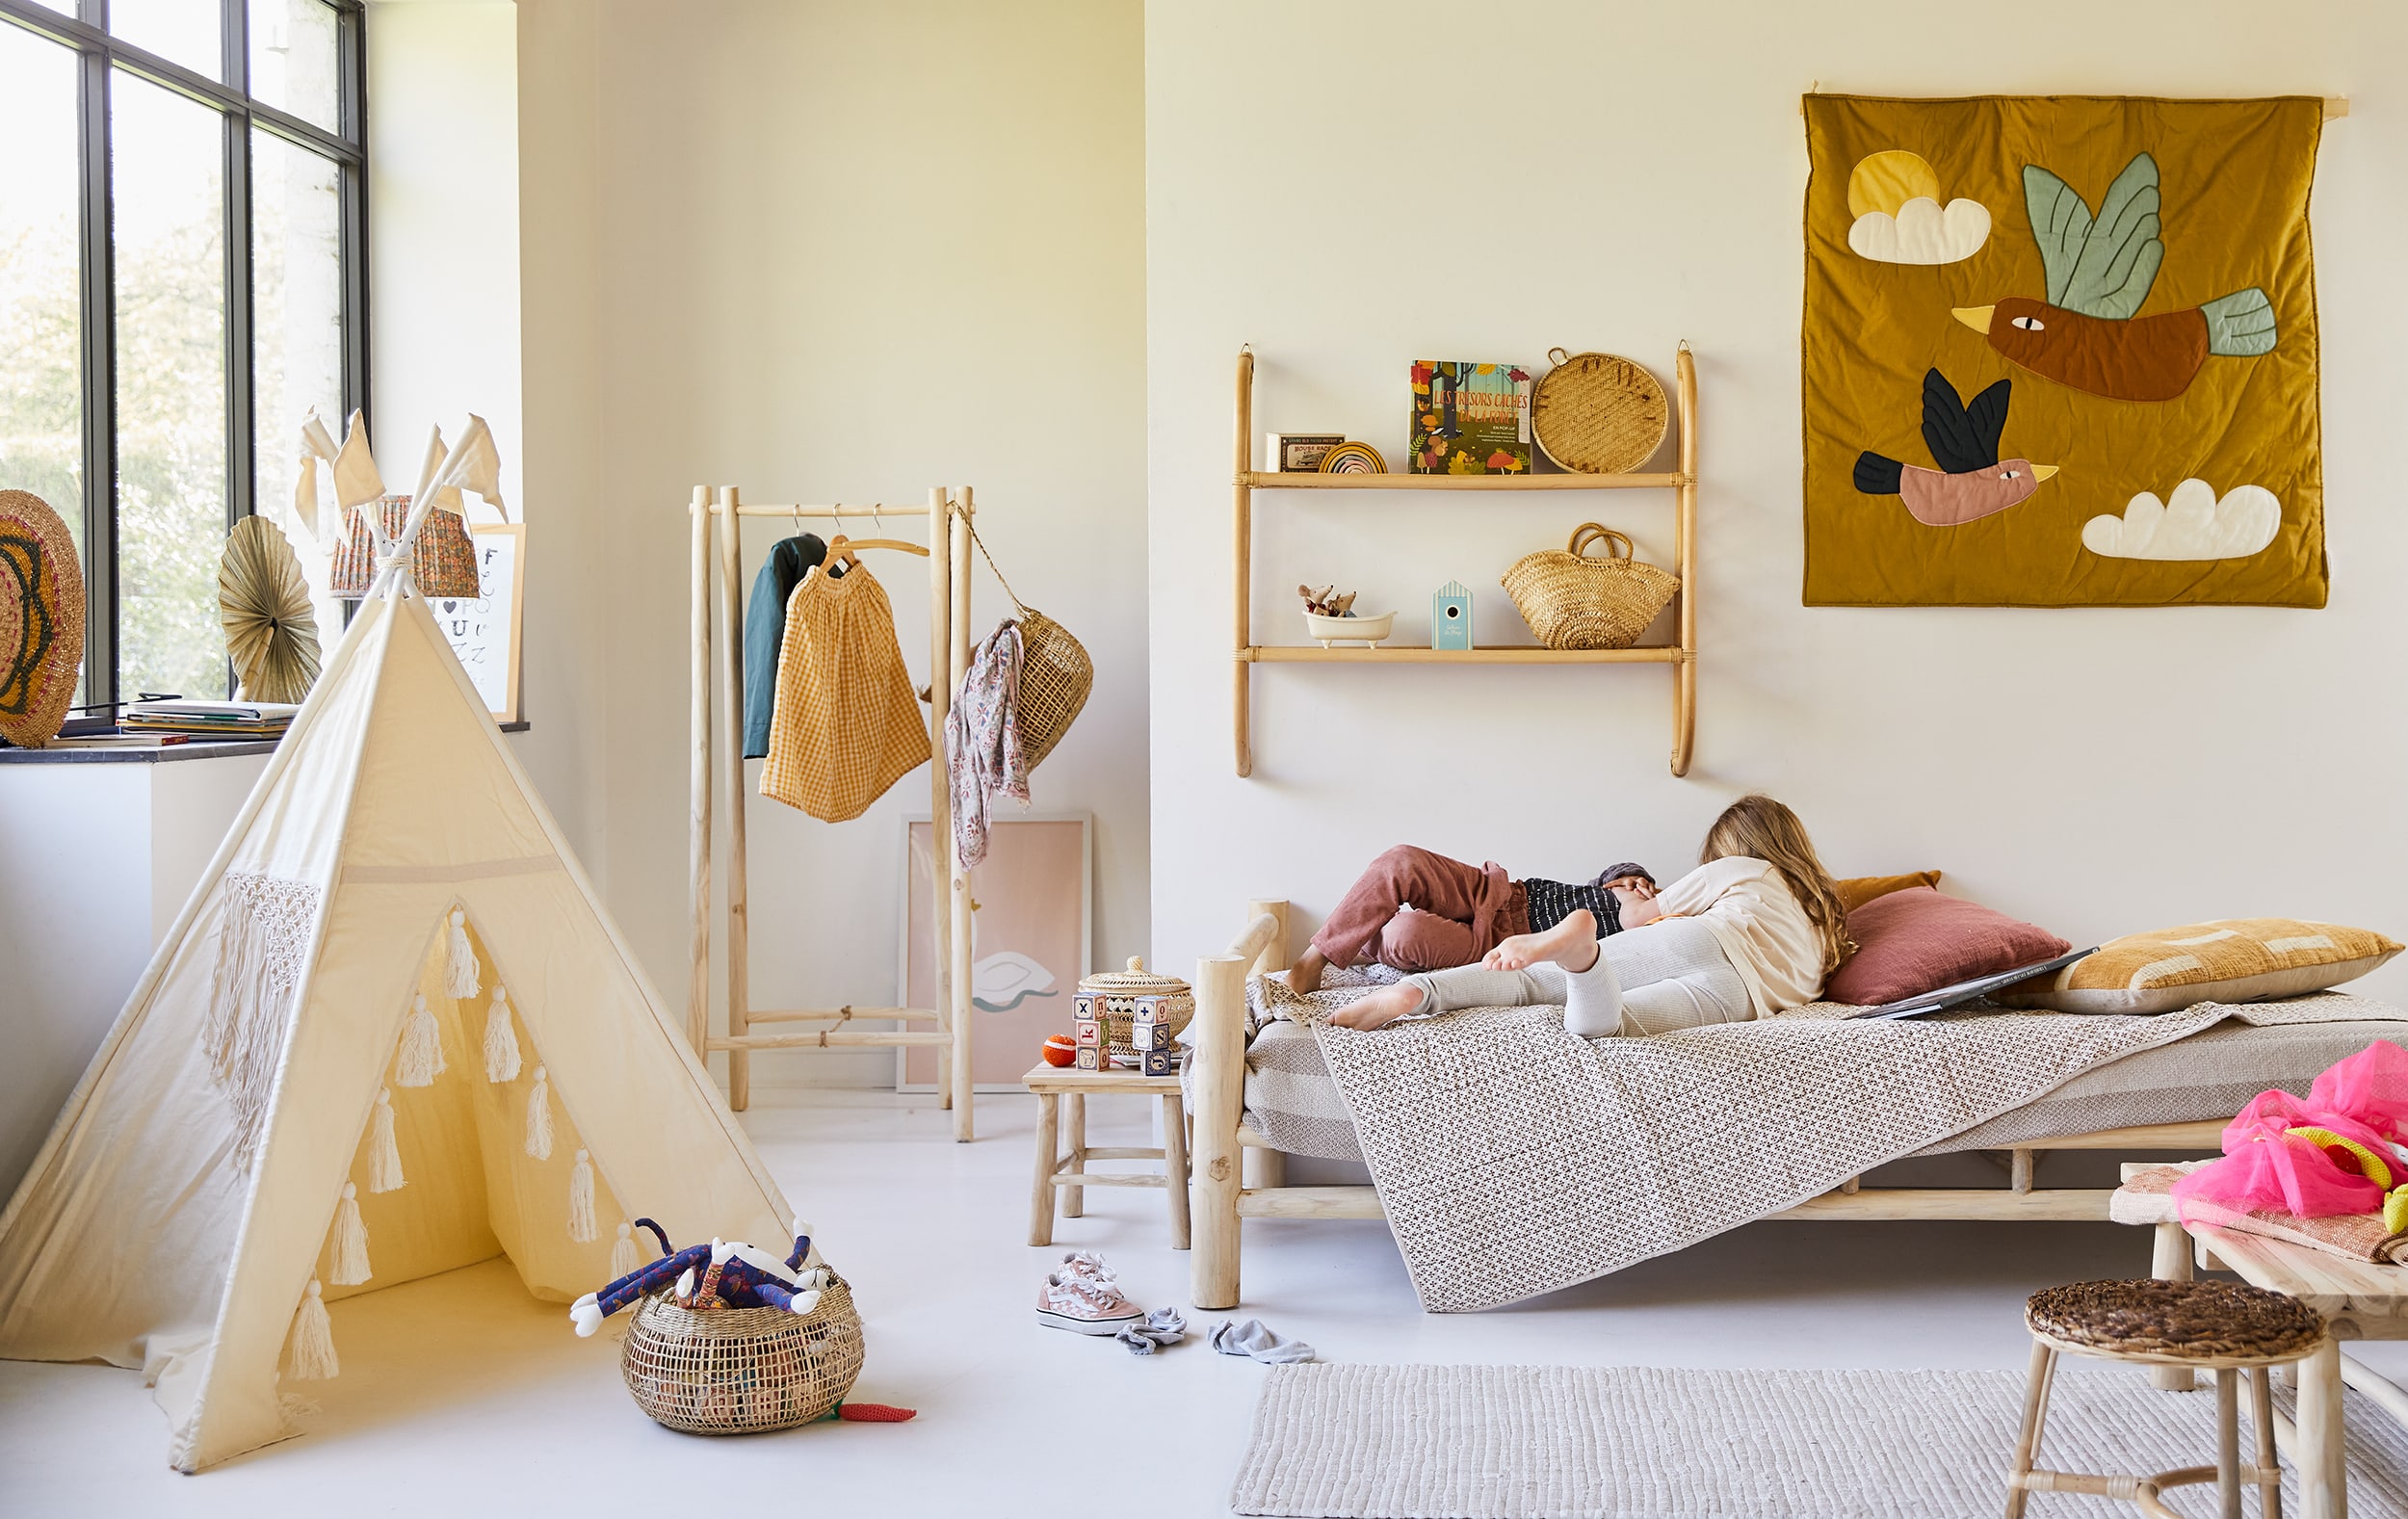 Read more about the article The charm of driftwood in children’s bedrooms